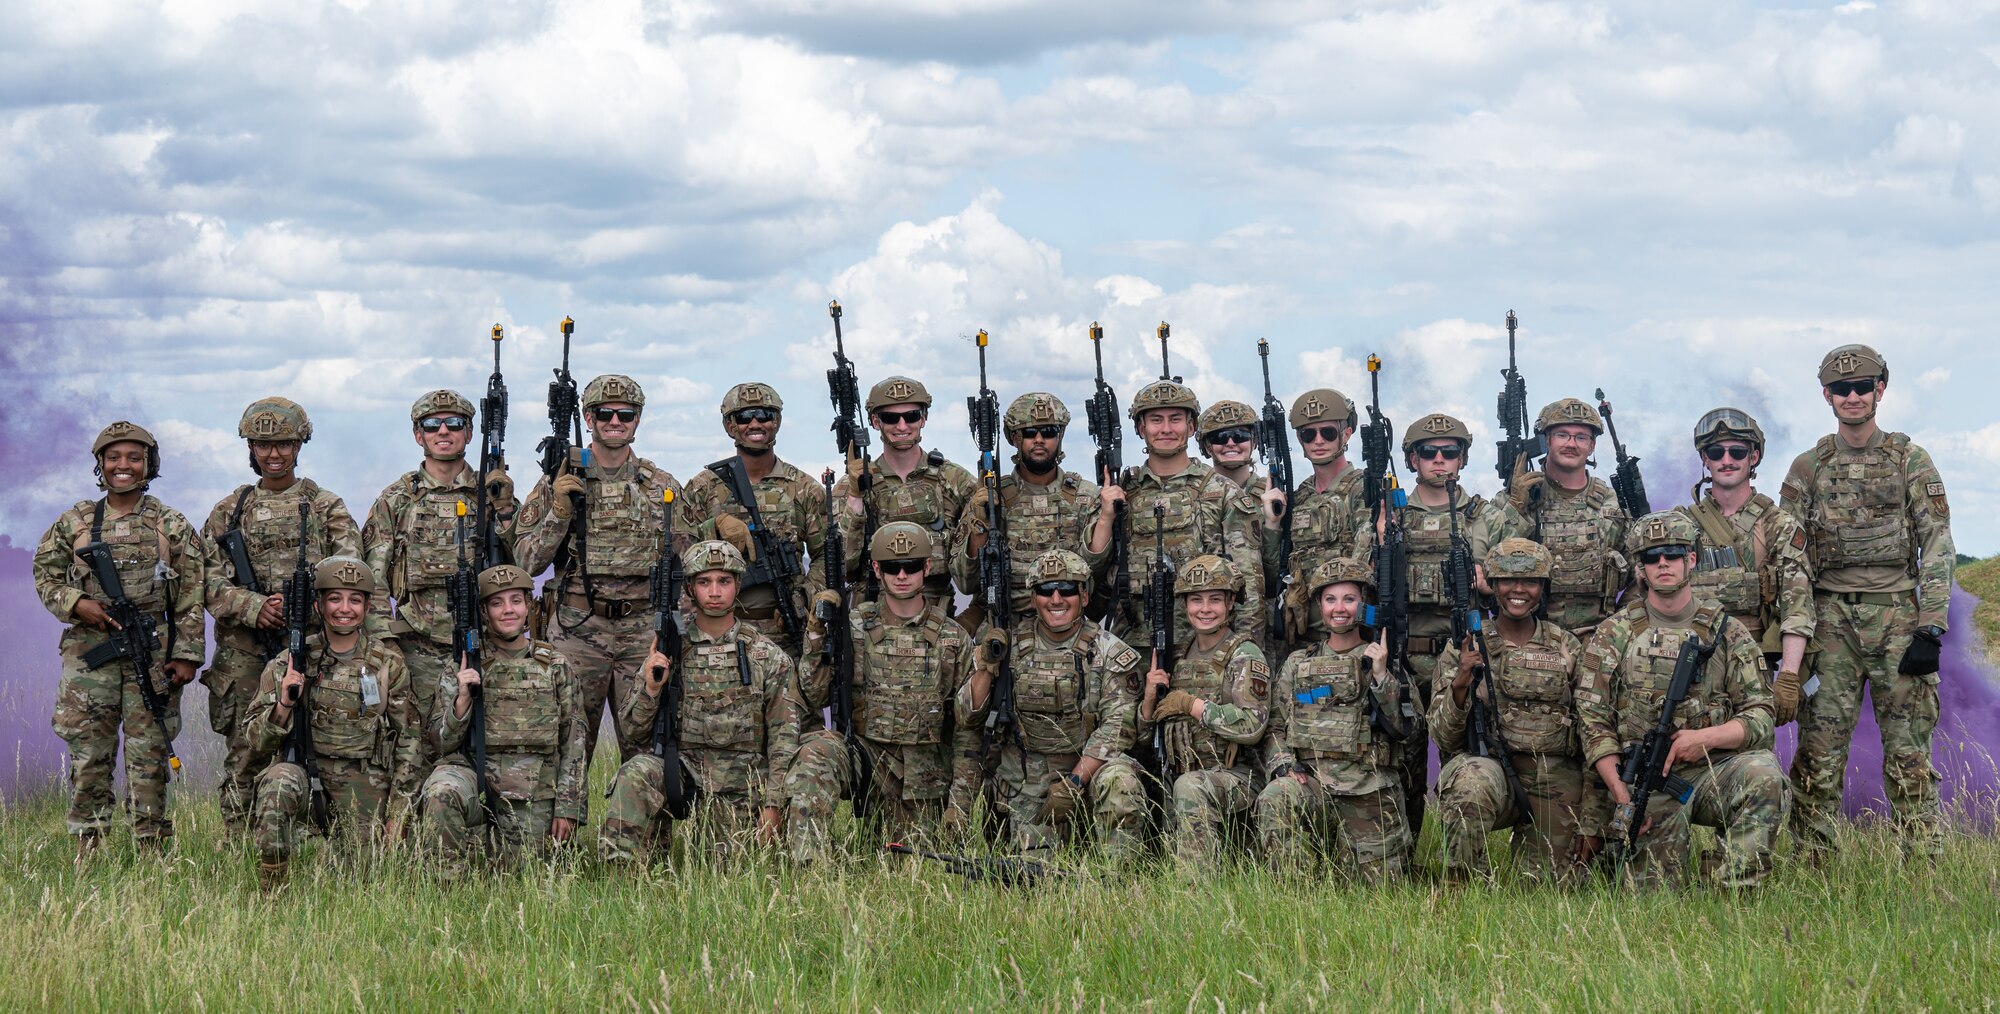 U.S. Air Force Airmen assigned to the 100th Security Forces Squadron, stand together following the end of small unit tactics training at Royal Air Force Mildenhall, England, June 21, 2023.